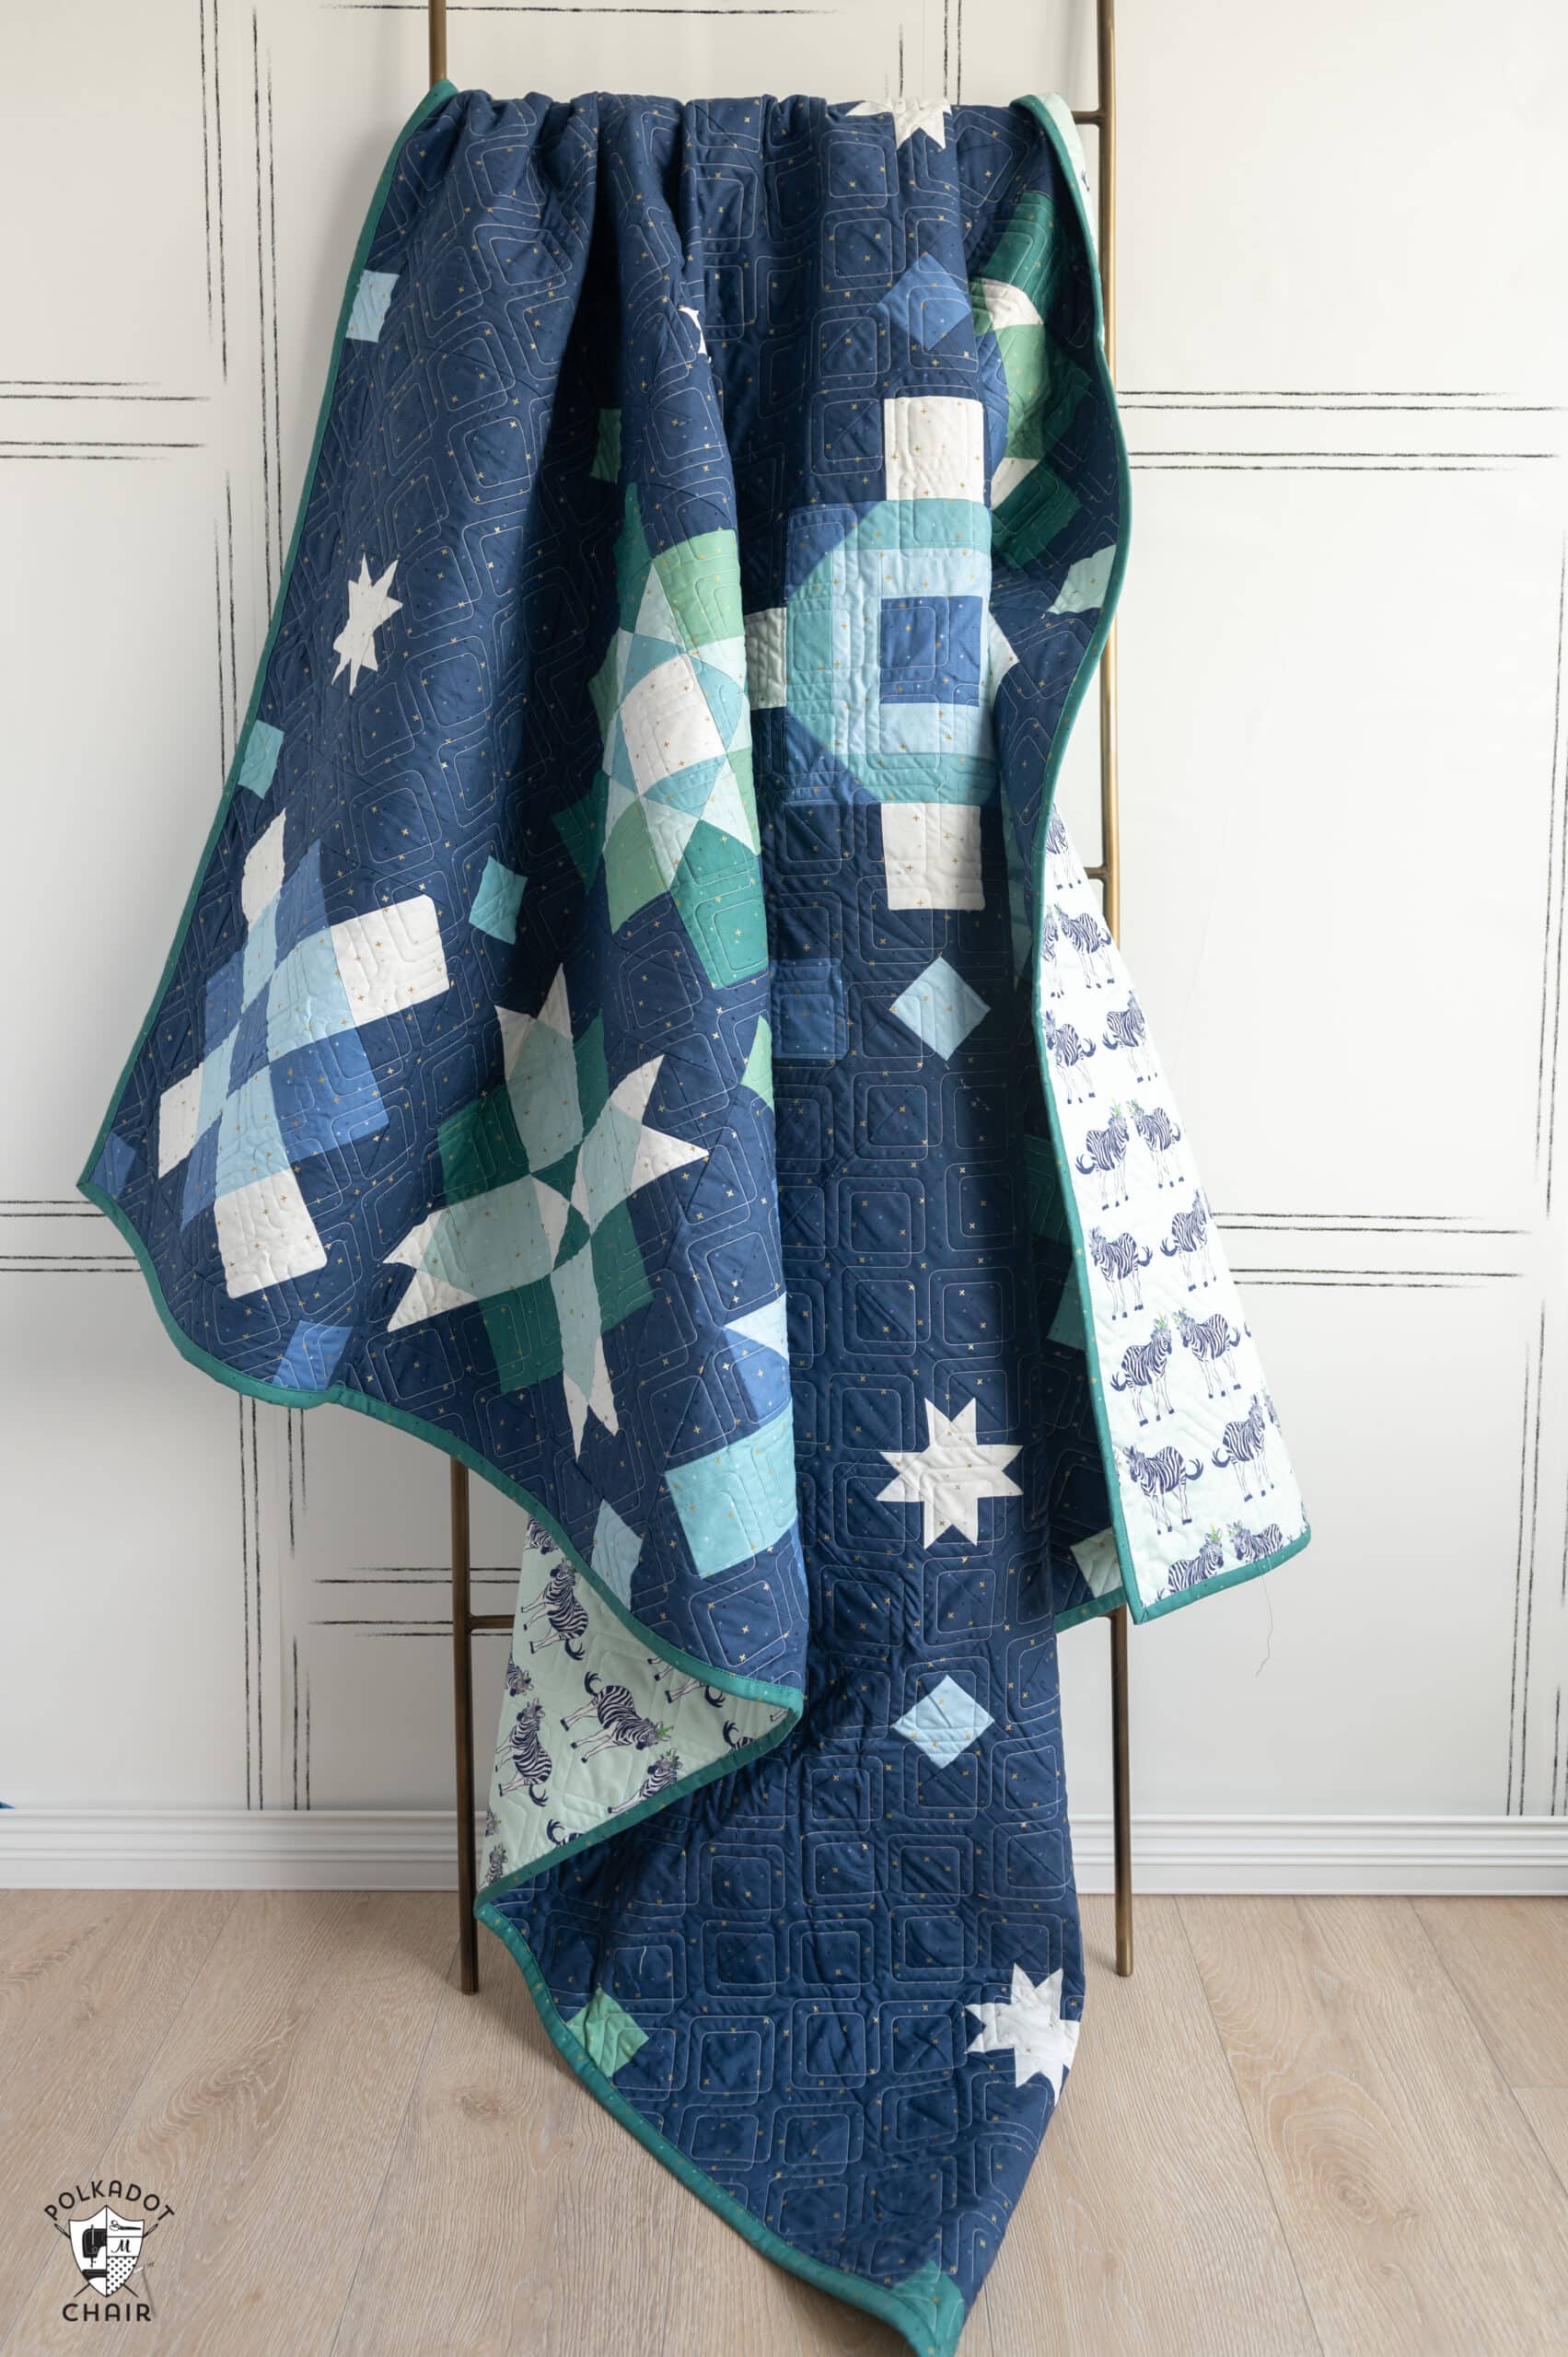 navy, blue and green quilt made from squares and rectangles - a modern granny square quilt pattern on ladder in white room